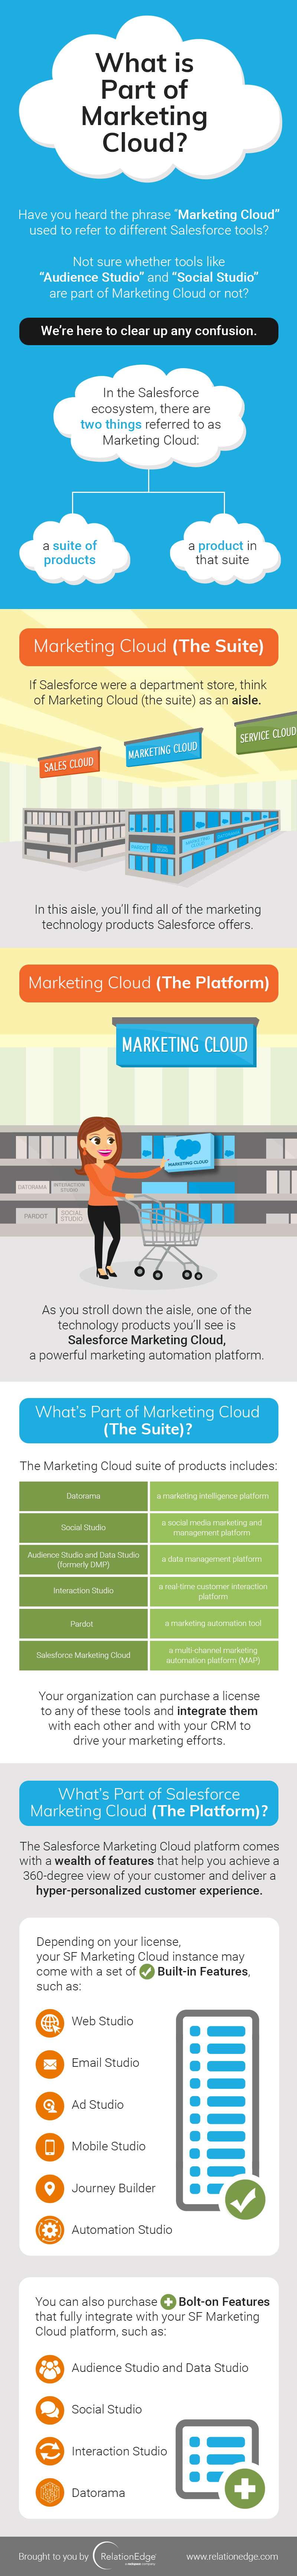 What Does Marketing Cloud Include? [Infographic]